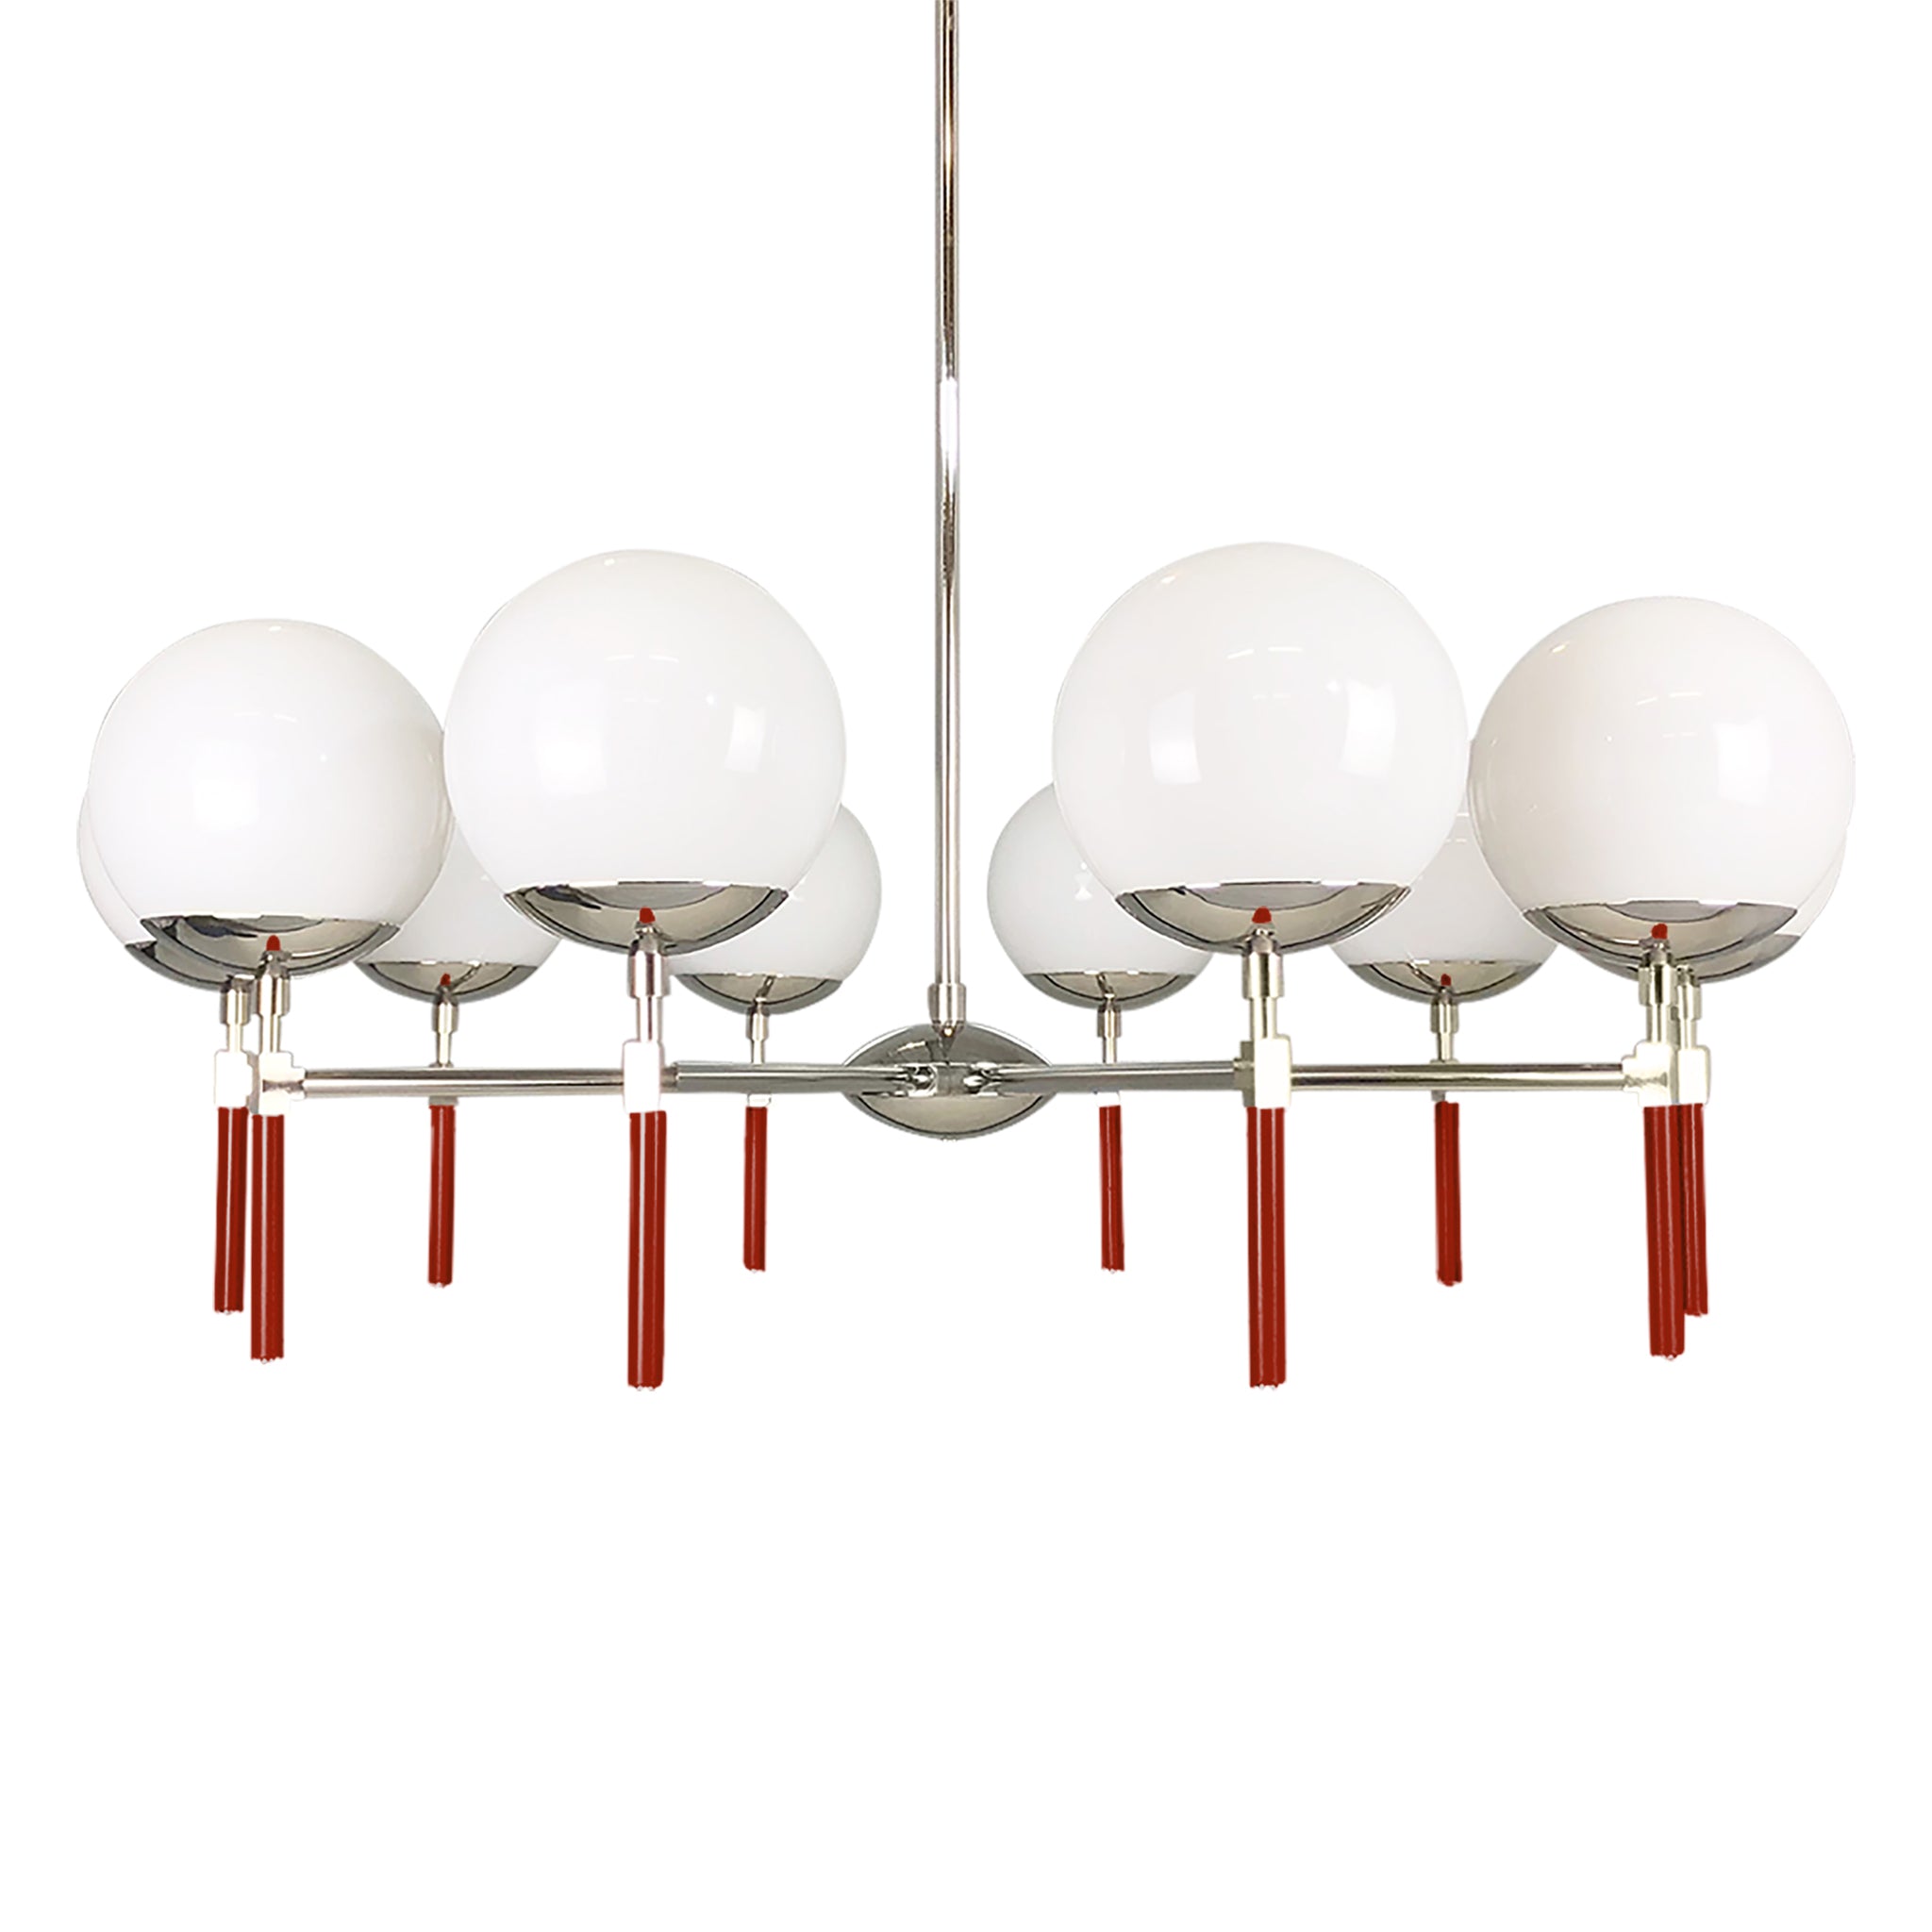 Nickel and riding hood red color Lolli chandelier 36" Dutton Brown lighting